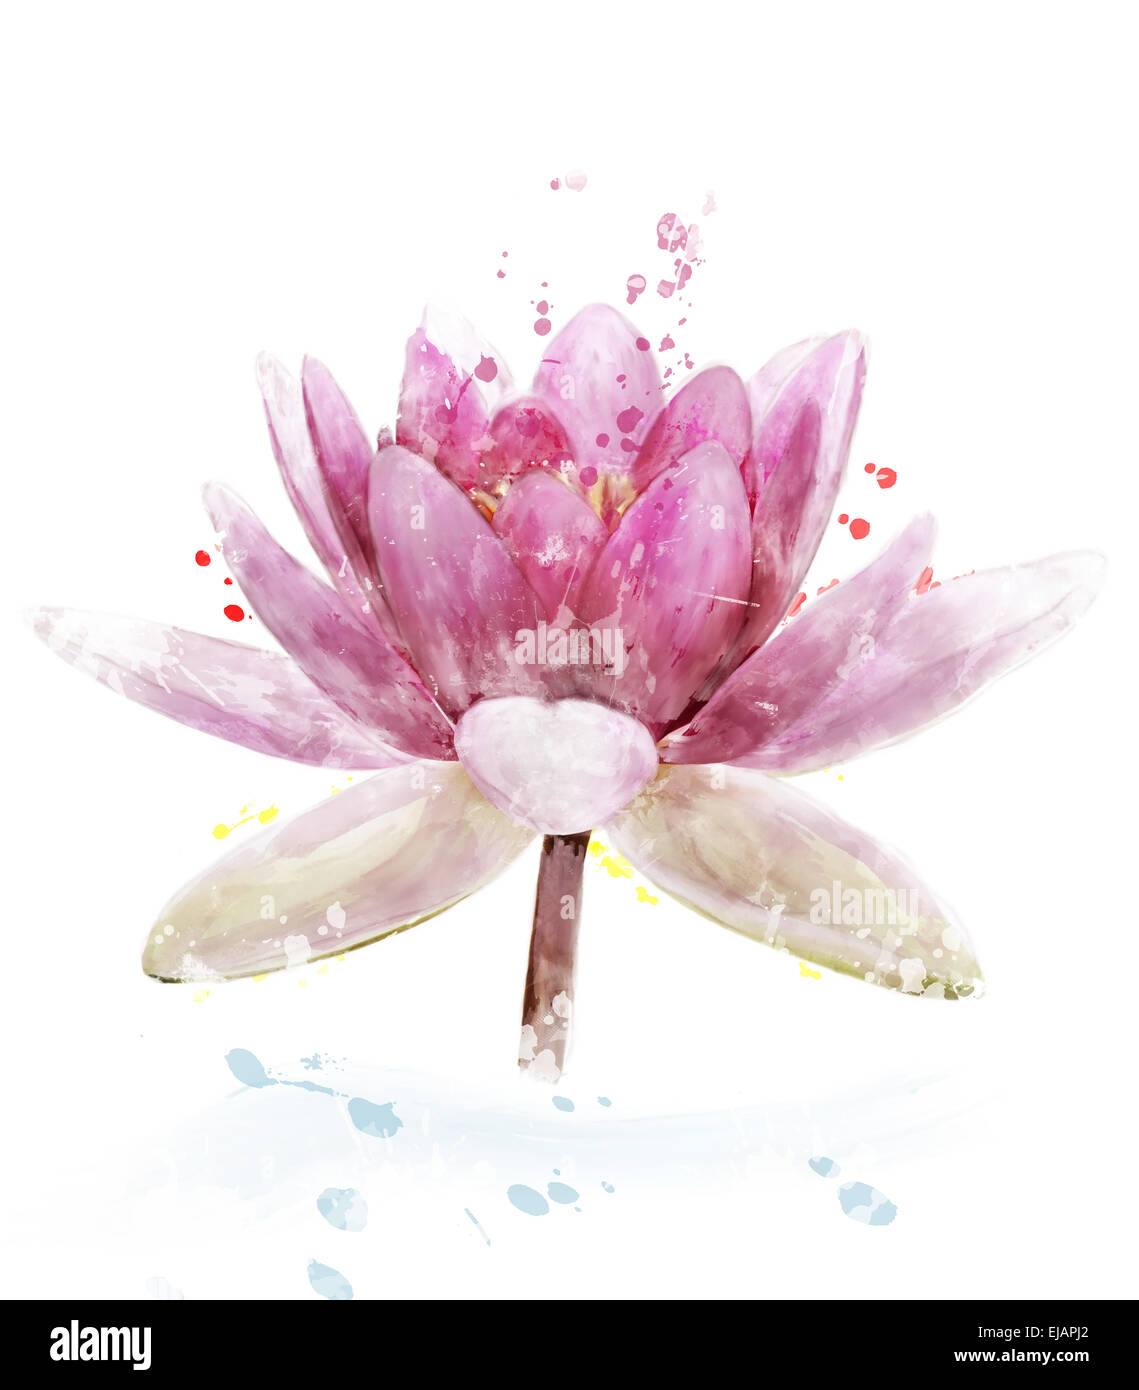 Watercolor Image Of Pink Waterlily Flower Stock Photo